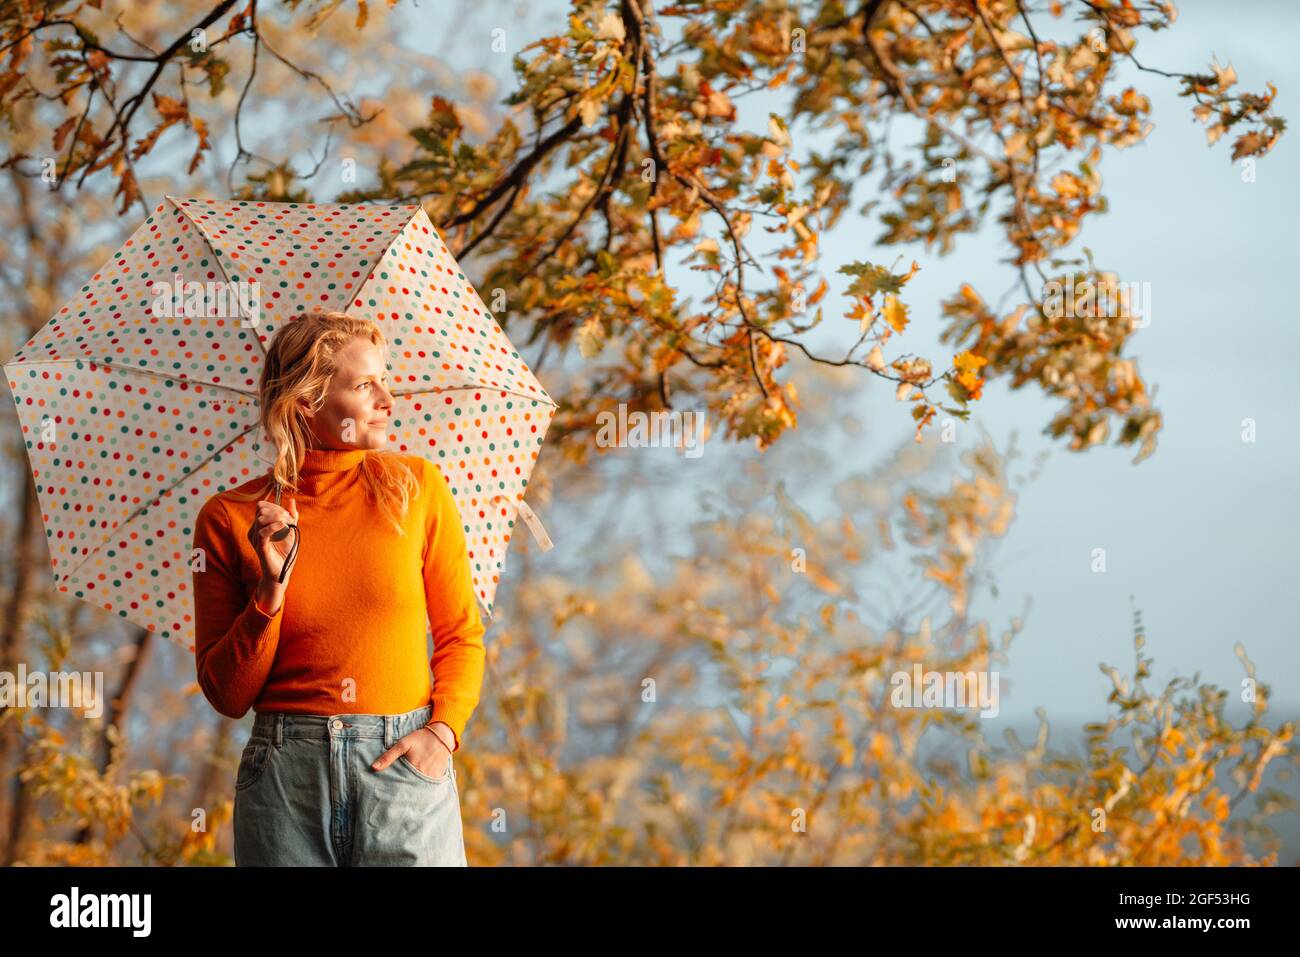 Woman looking away while standing with hand in pocket holding umbrella on sunny day Stock Photo